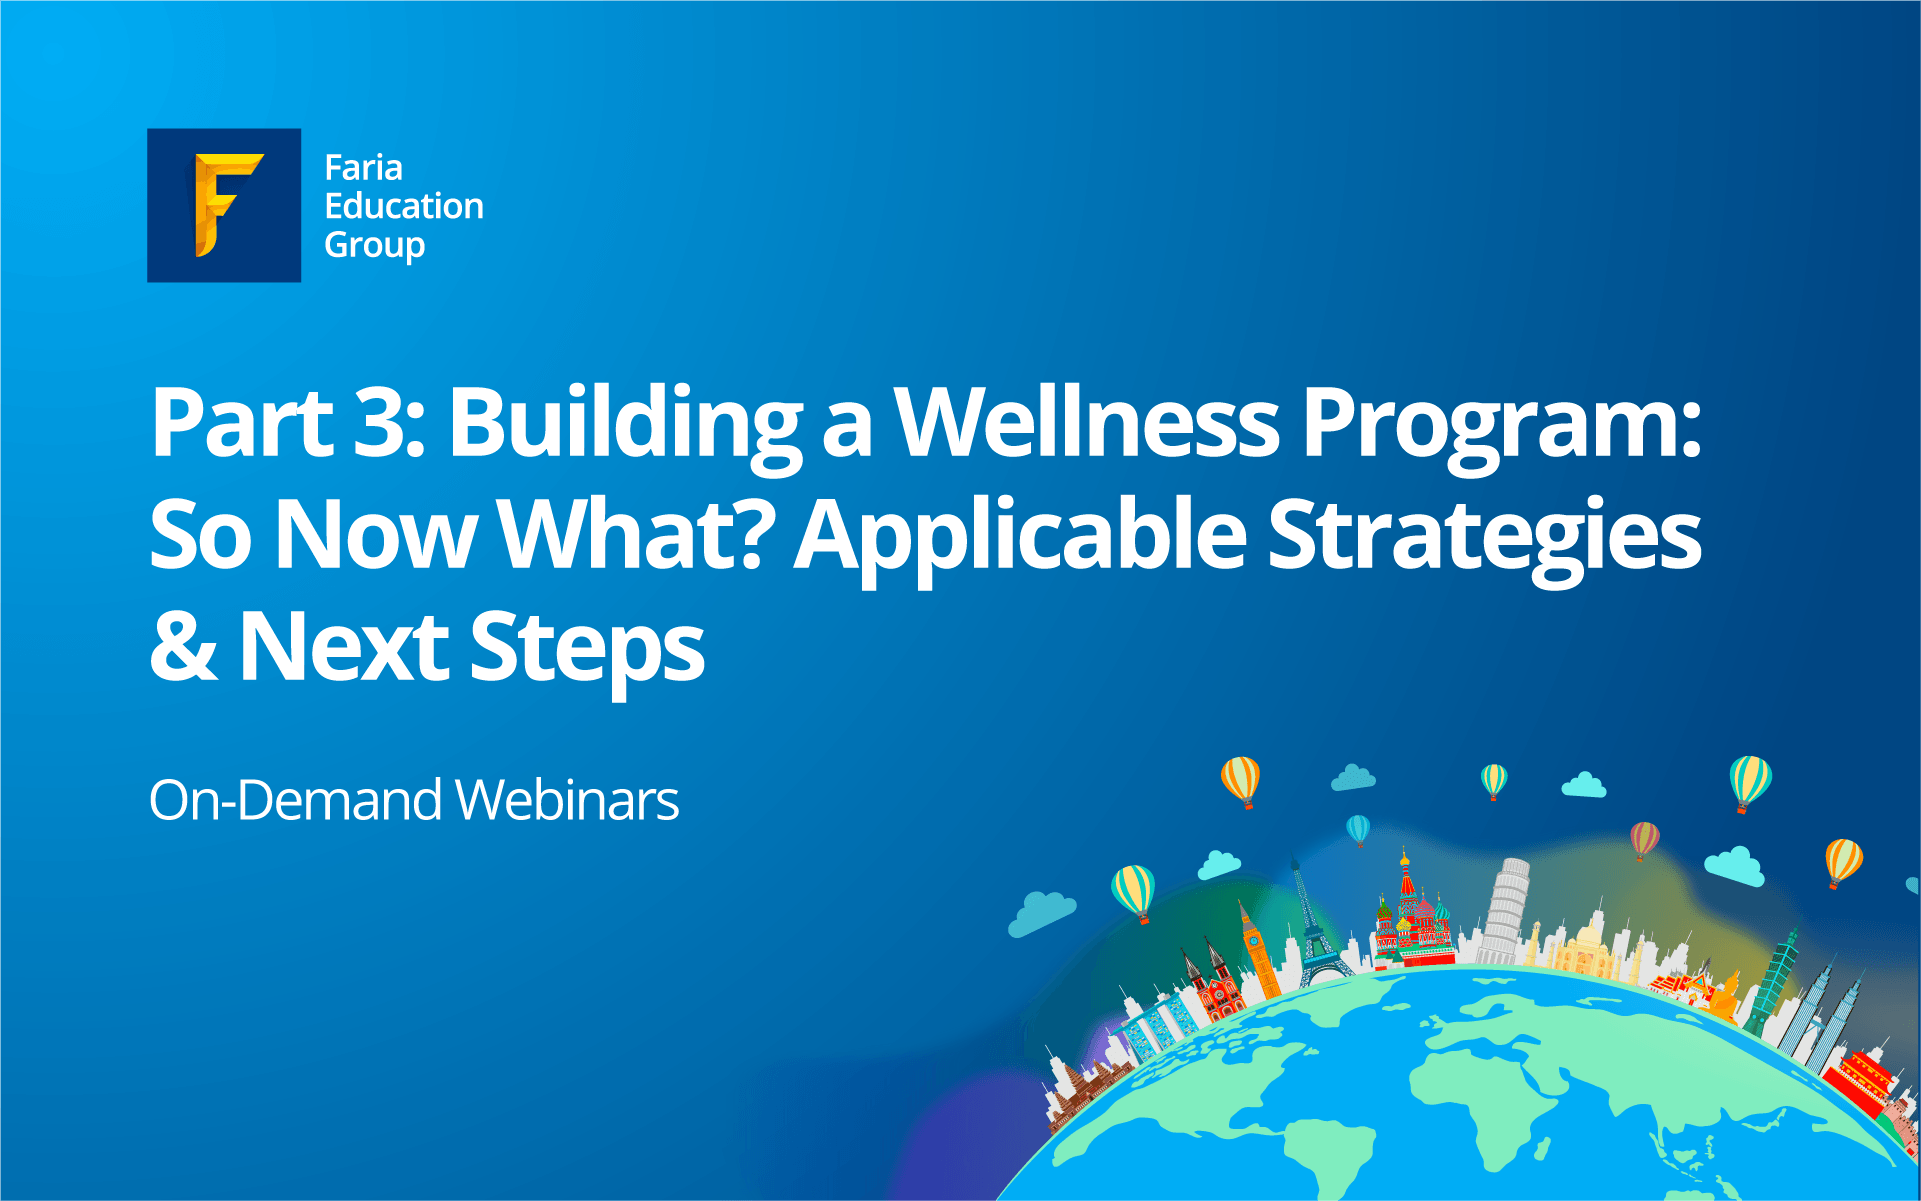 Part 3: Building a Wellness Program: So Now What? Applicable Strategies & Next Steps